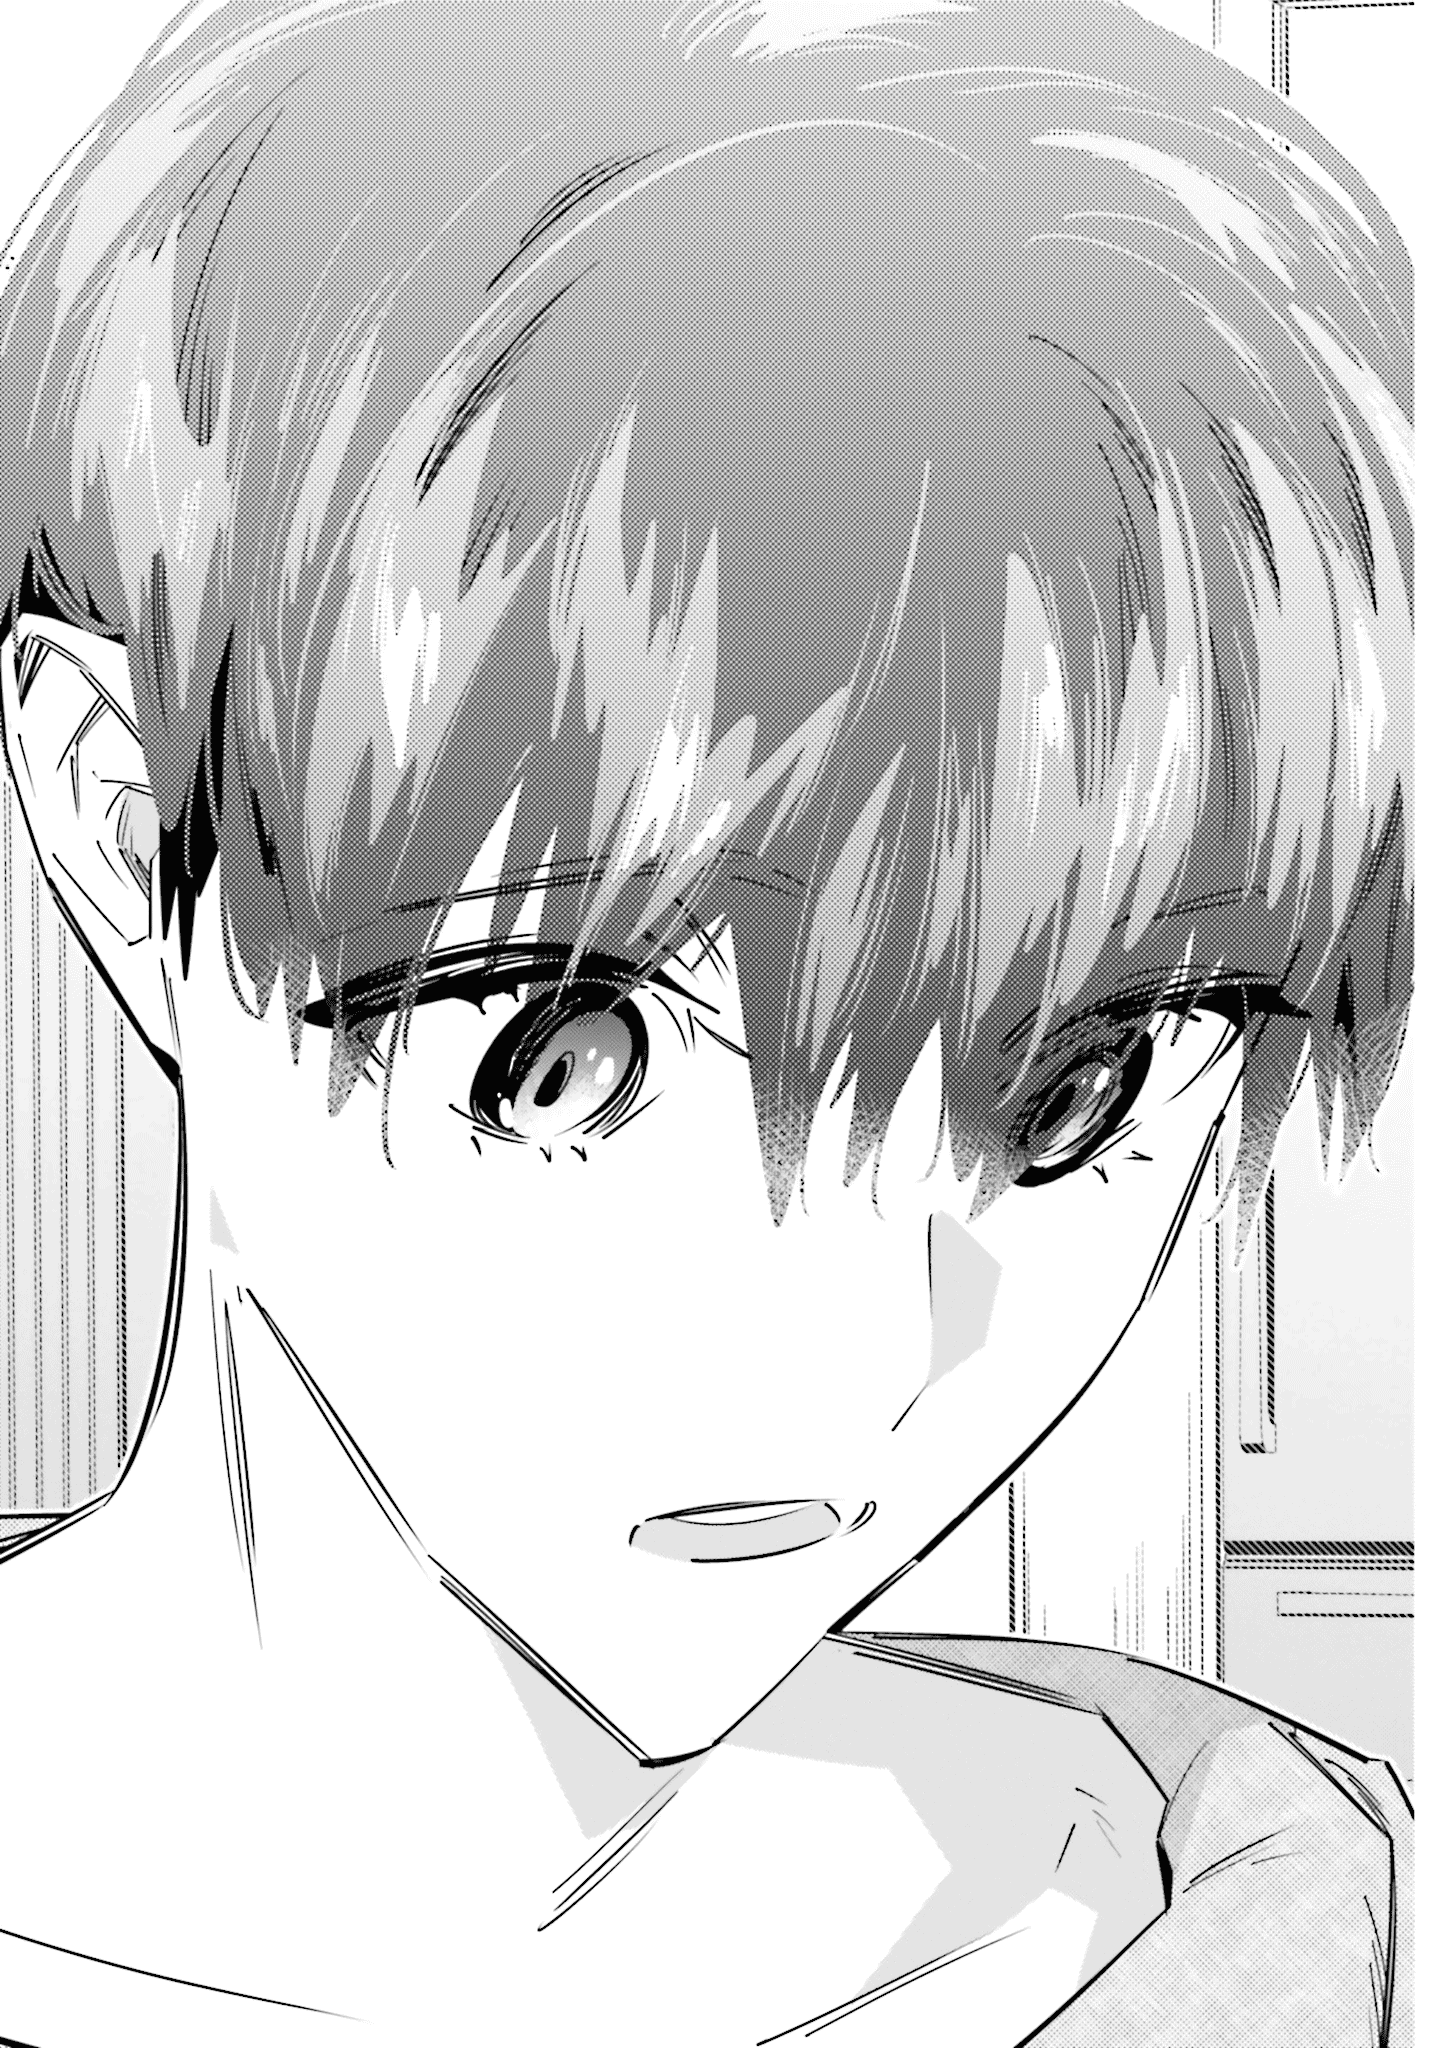 I Reincarnated As The Little Sister Of A Death Game Manga's Murder Mastermind And Failed Chapter 6 #27